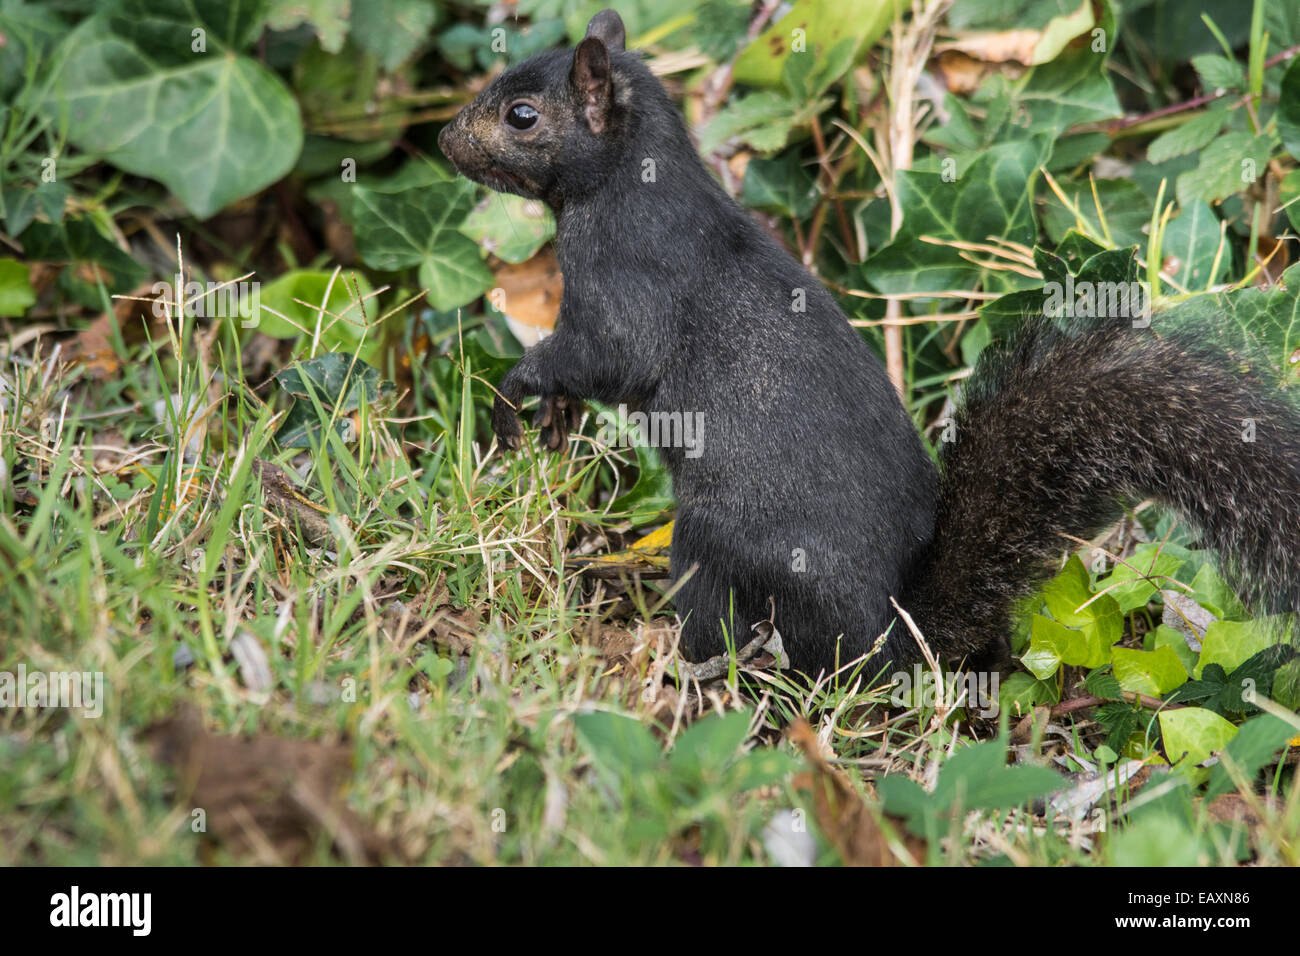 Black Squirrel collecting nuts against green ivy and grass. Stock Photo